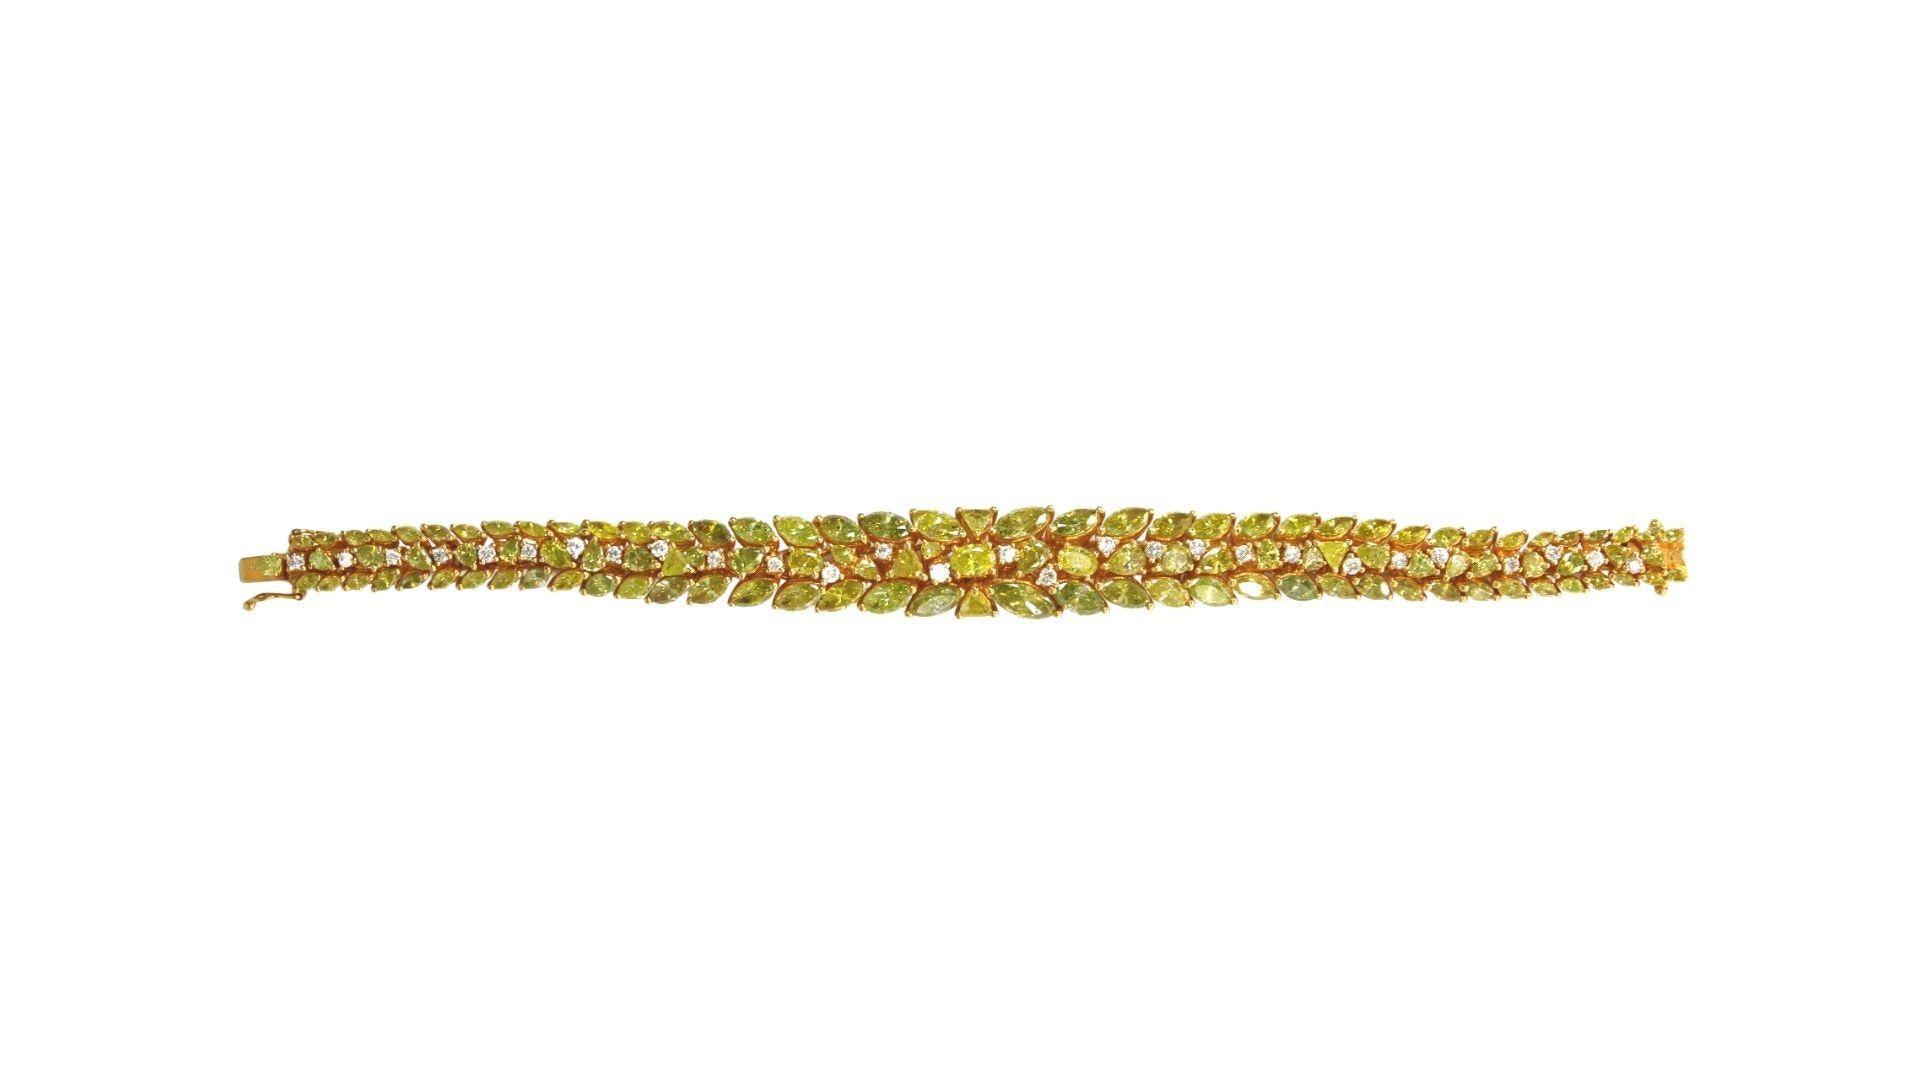 Diamond Leaf Bracelet in 18k Yellow Gold. 
Opposing laurel leaves stacked into a pattern of round yellow and white diamonds.
25.71.K Diamonds
*Signed*

Measures approx 7″ in length, 0.40″ in width

weight- 39.13 Grams.